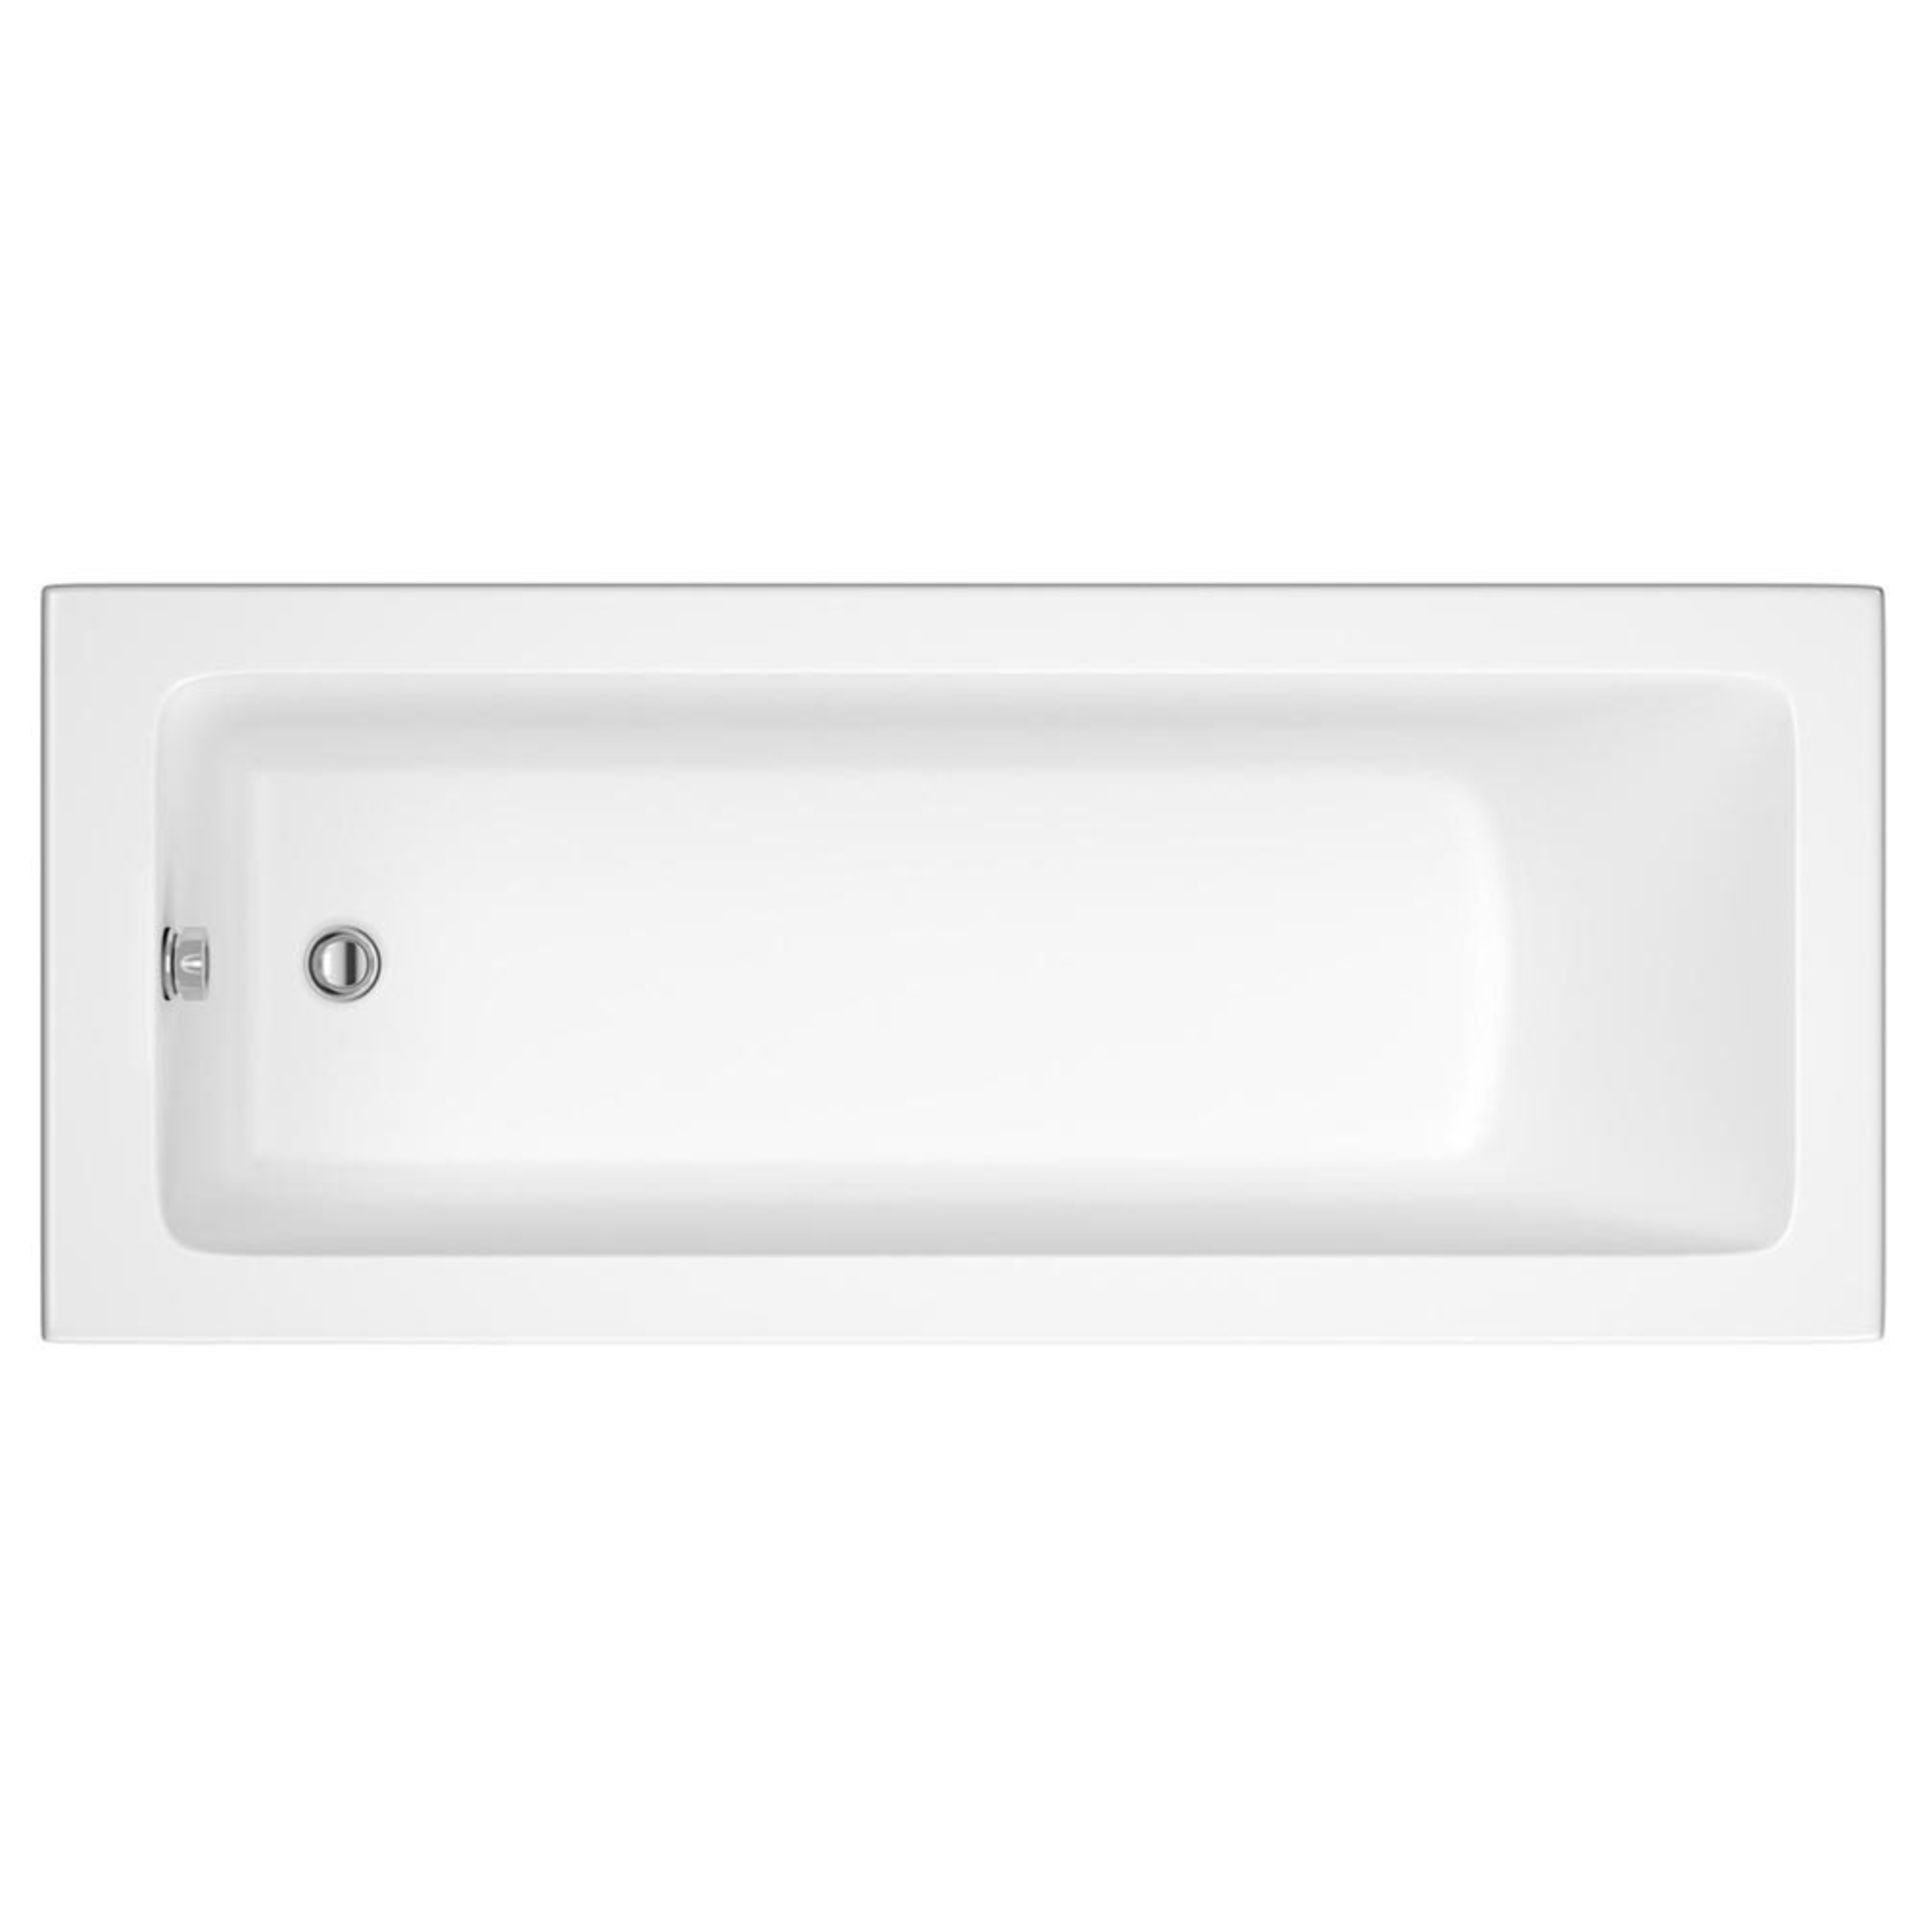 (P103) Kent Bath 1500 x 700 - Single Ended - Excludes Panels. RRP £249.99. Give your bathroom a - Image 2 of 2